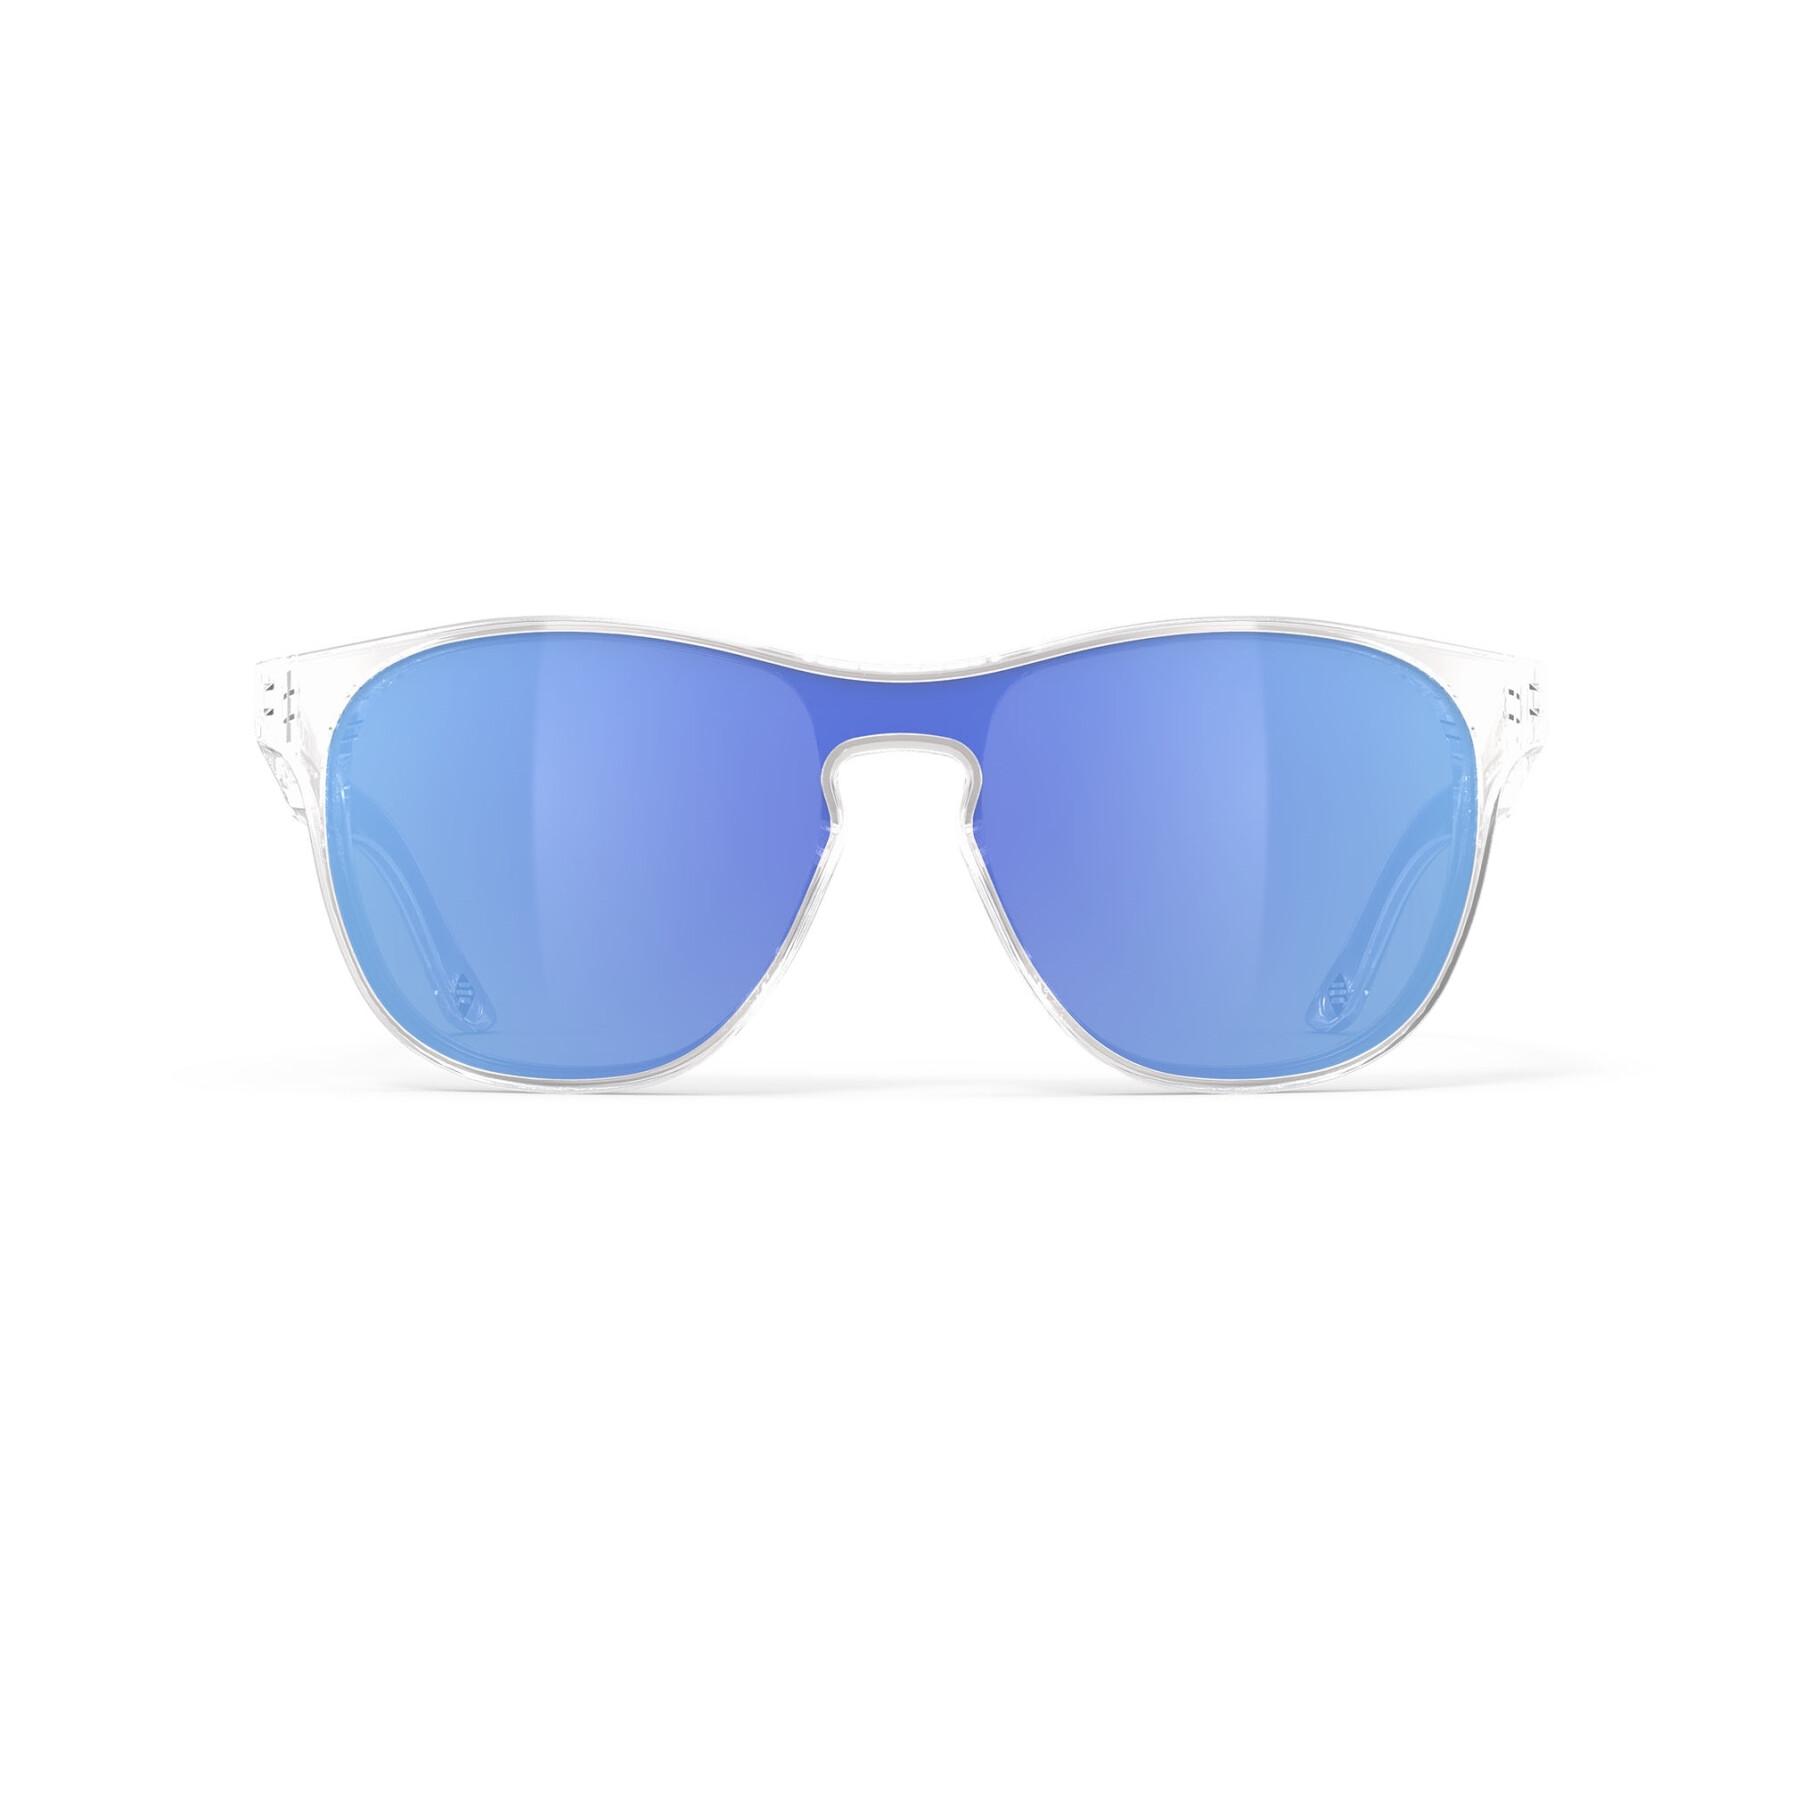 Sunglasses Rudy Project soundshield